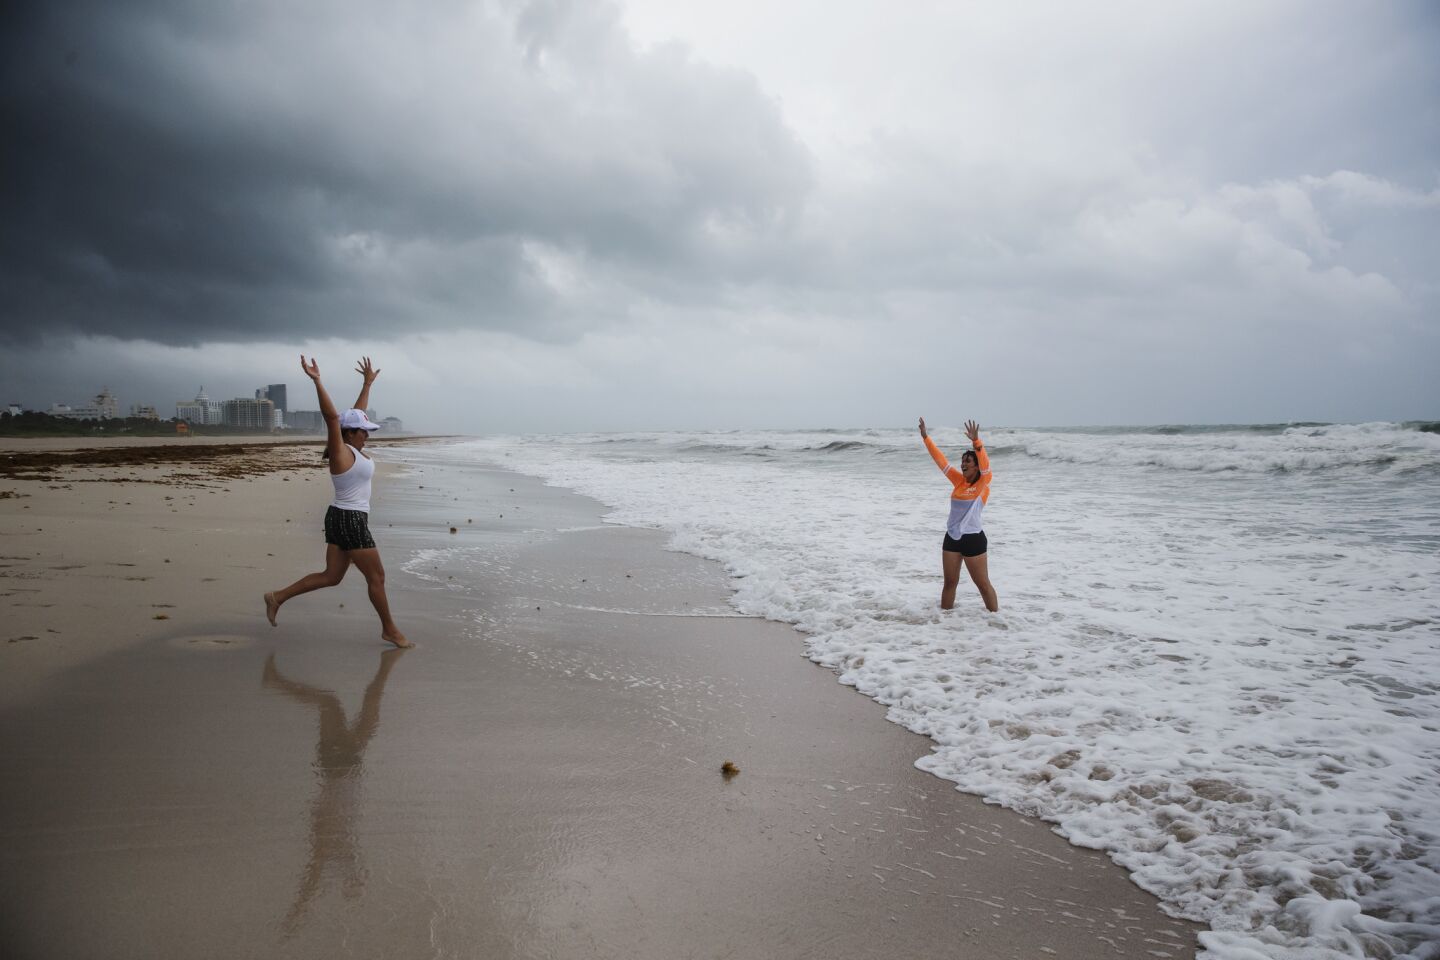 Lisette Toroella and Tatiana Morera play on the beach as storm clouds approach in Miami Beach.